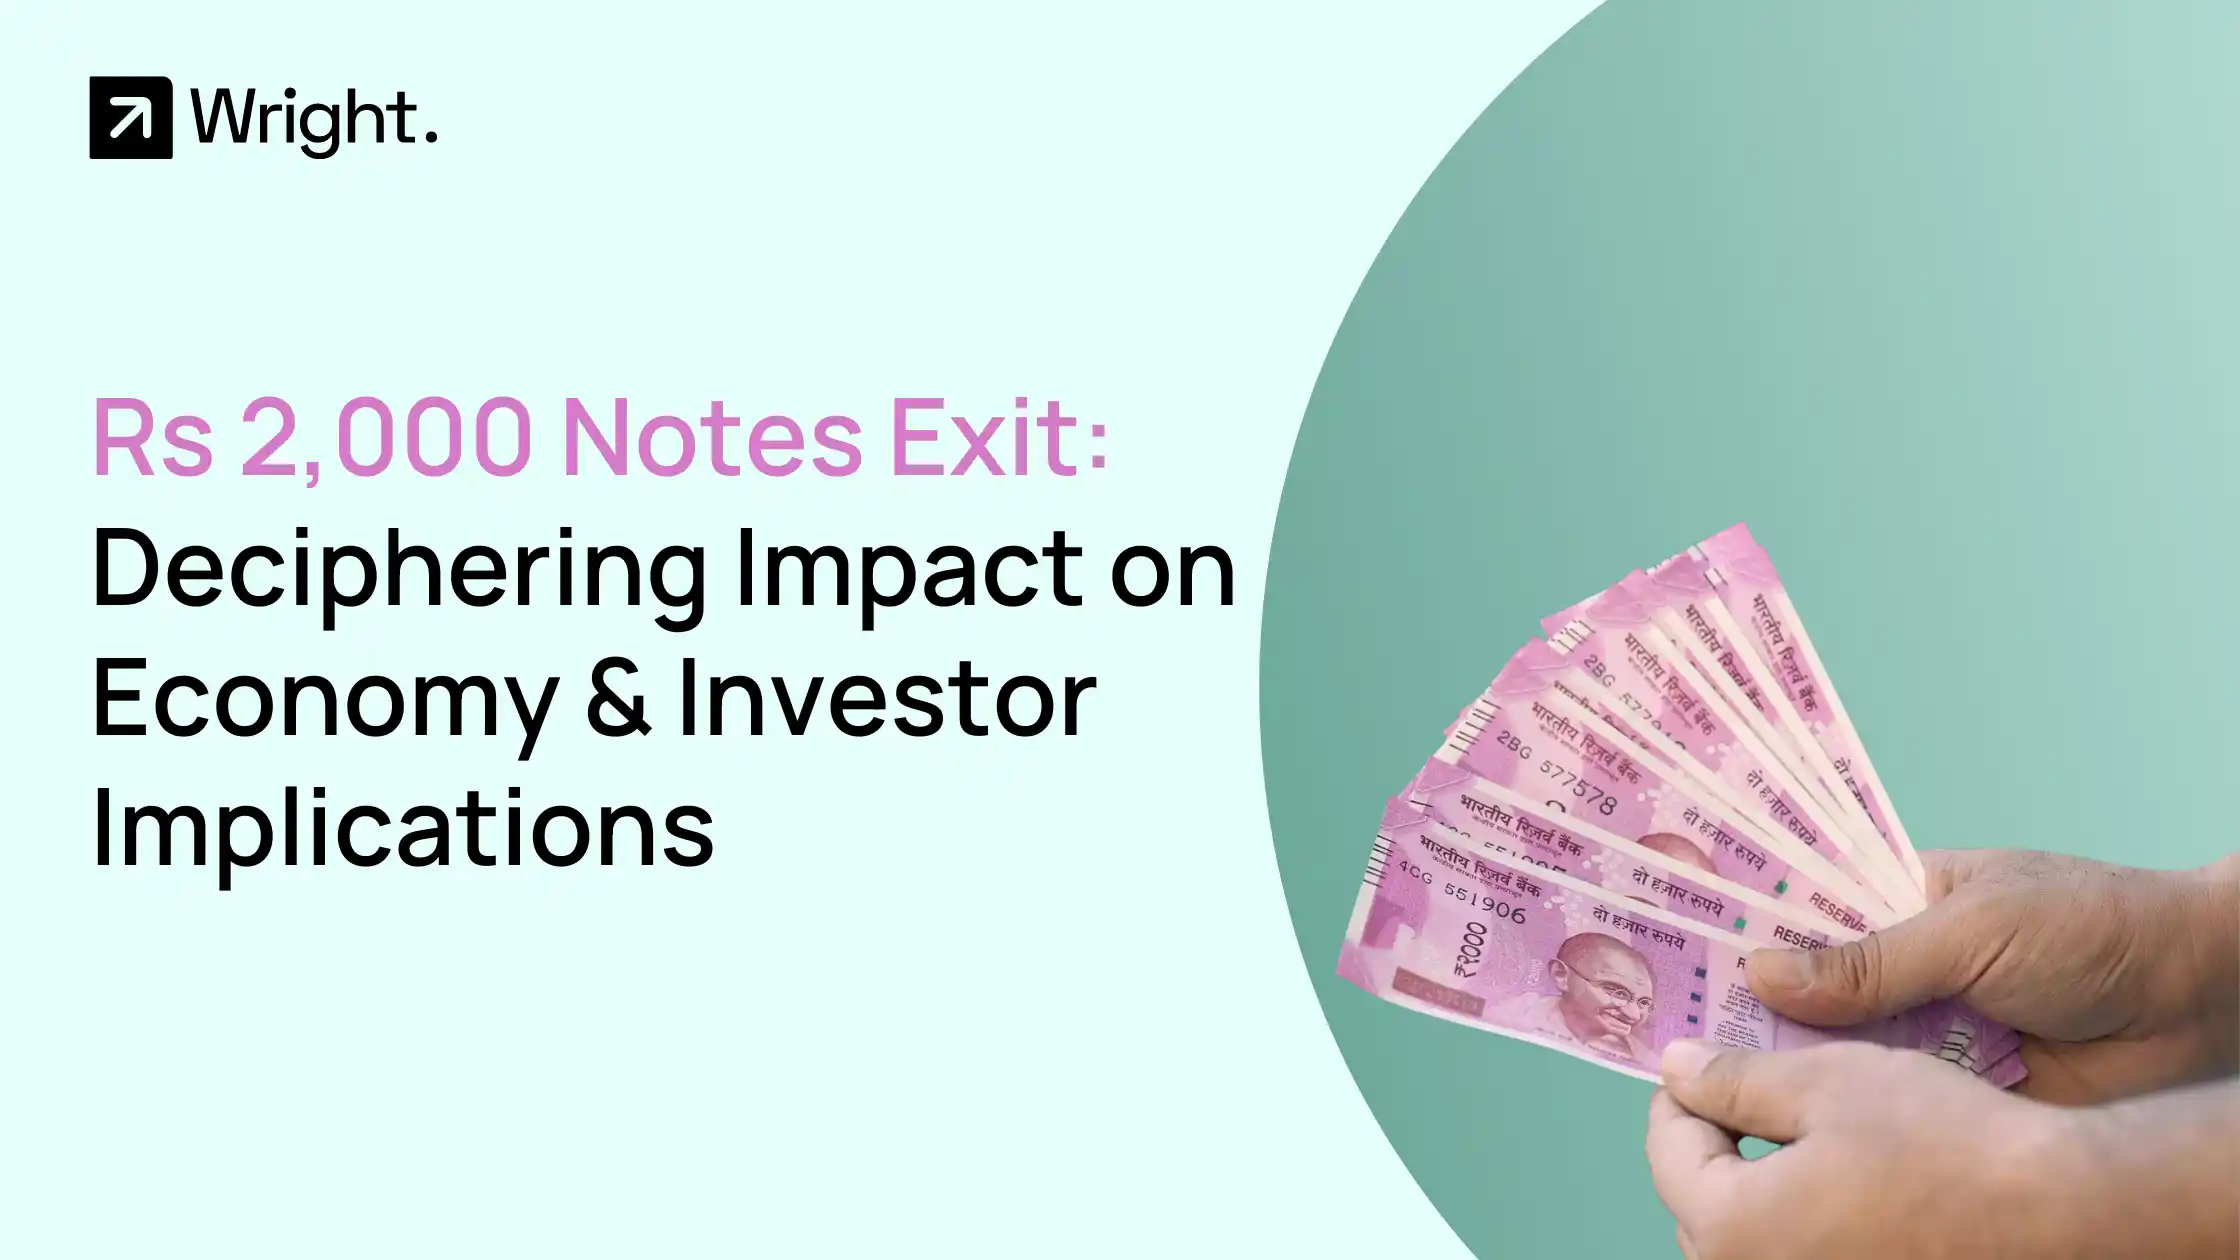 Rs 2,000 Notes Exit: Deciphering Impact on Economy and Investor Implications